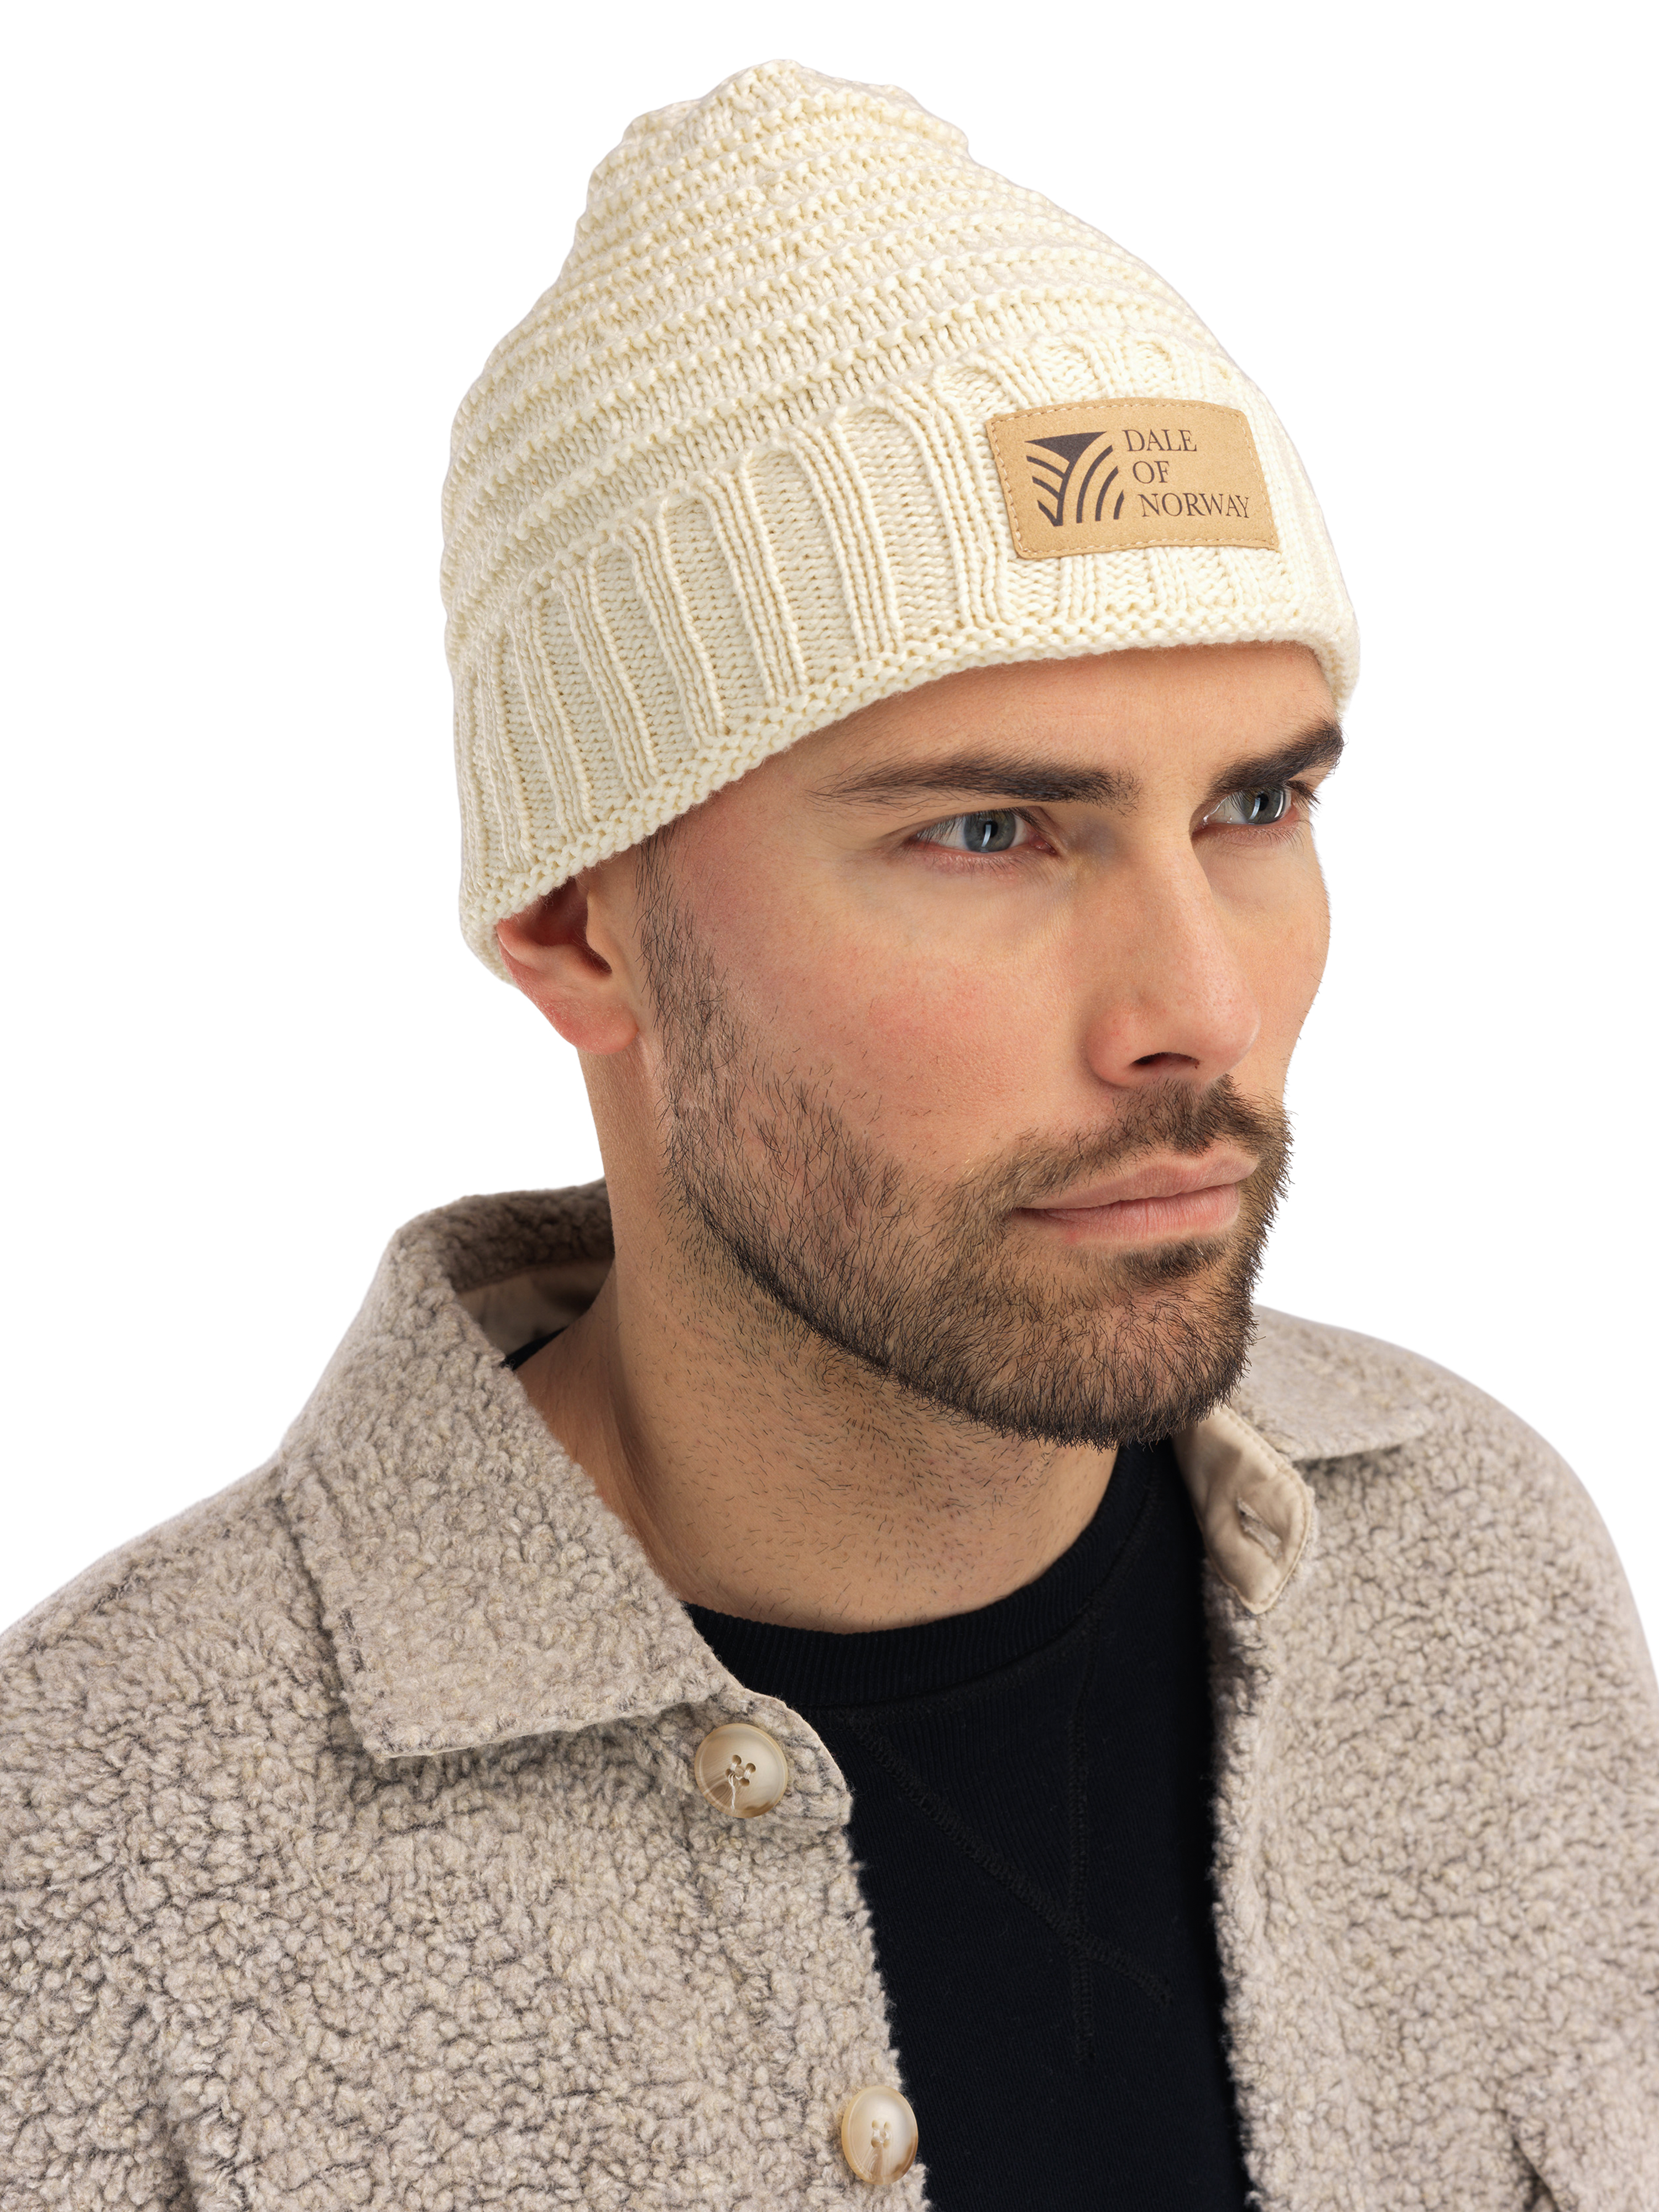 Måløy hat - Unisex - Offwhite - Dale of Norway - Dale of Norway